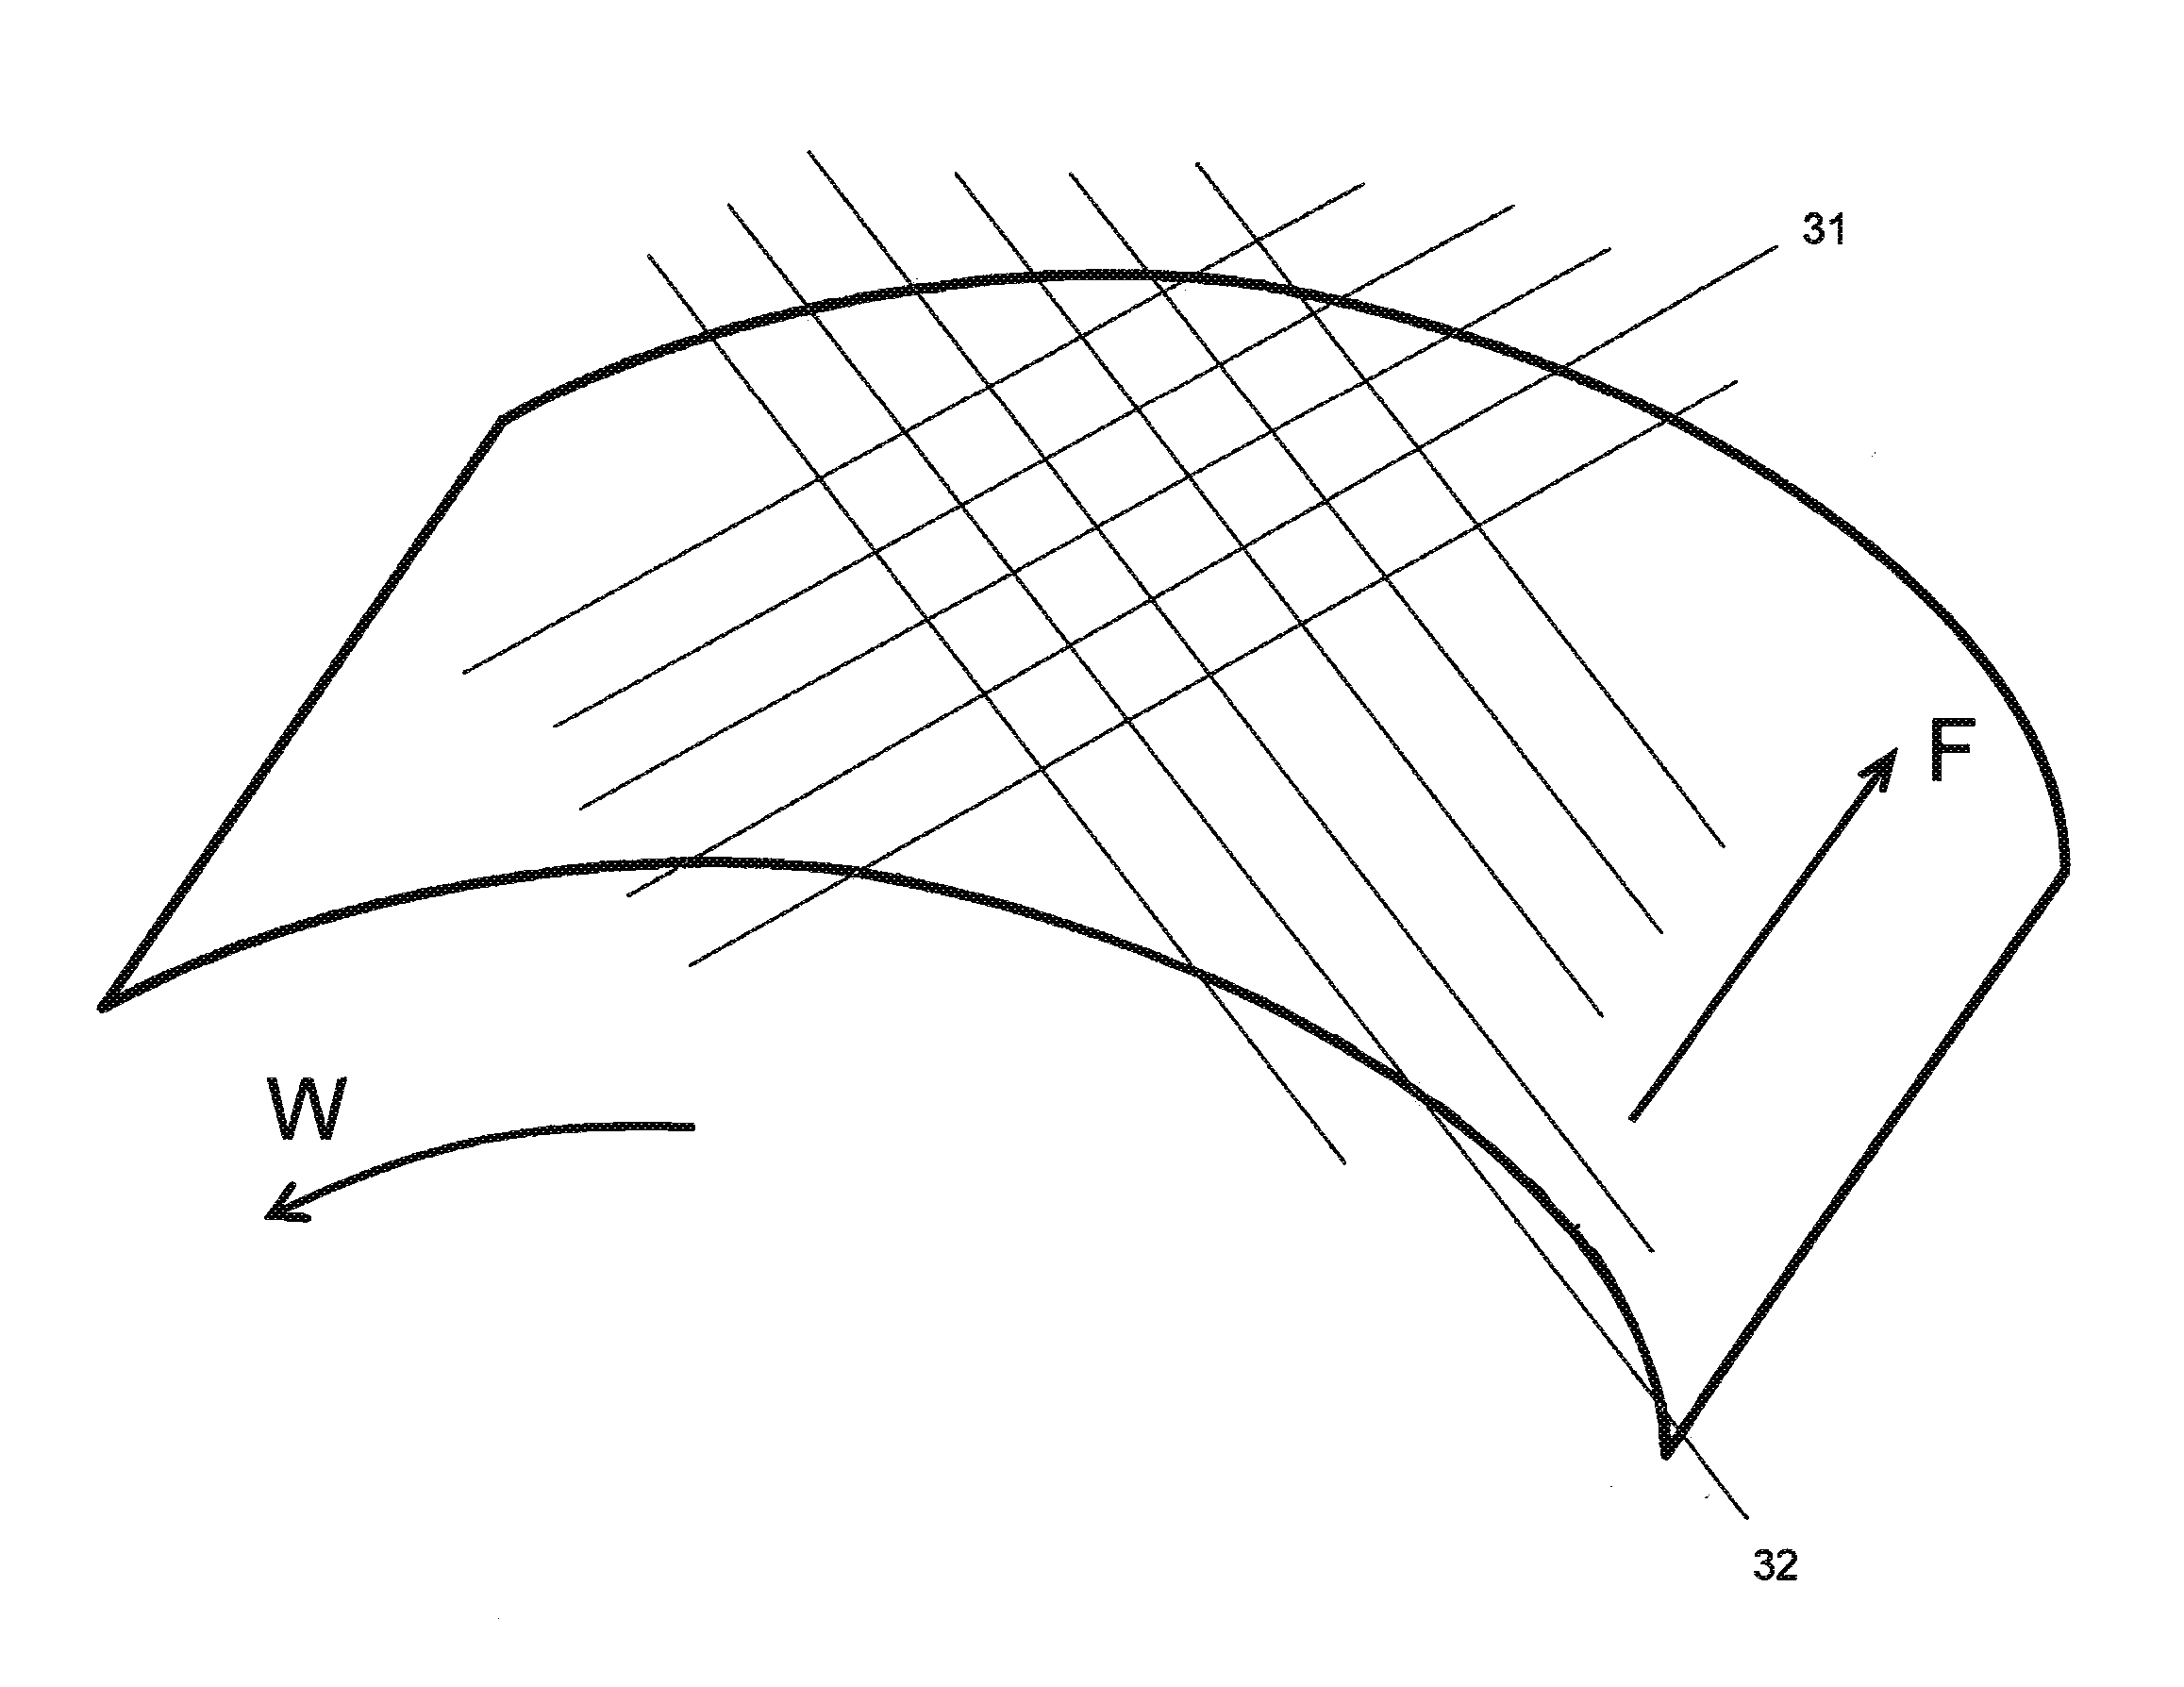 Surface Structure for a Working Device